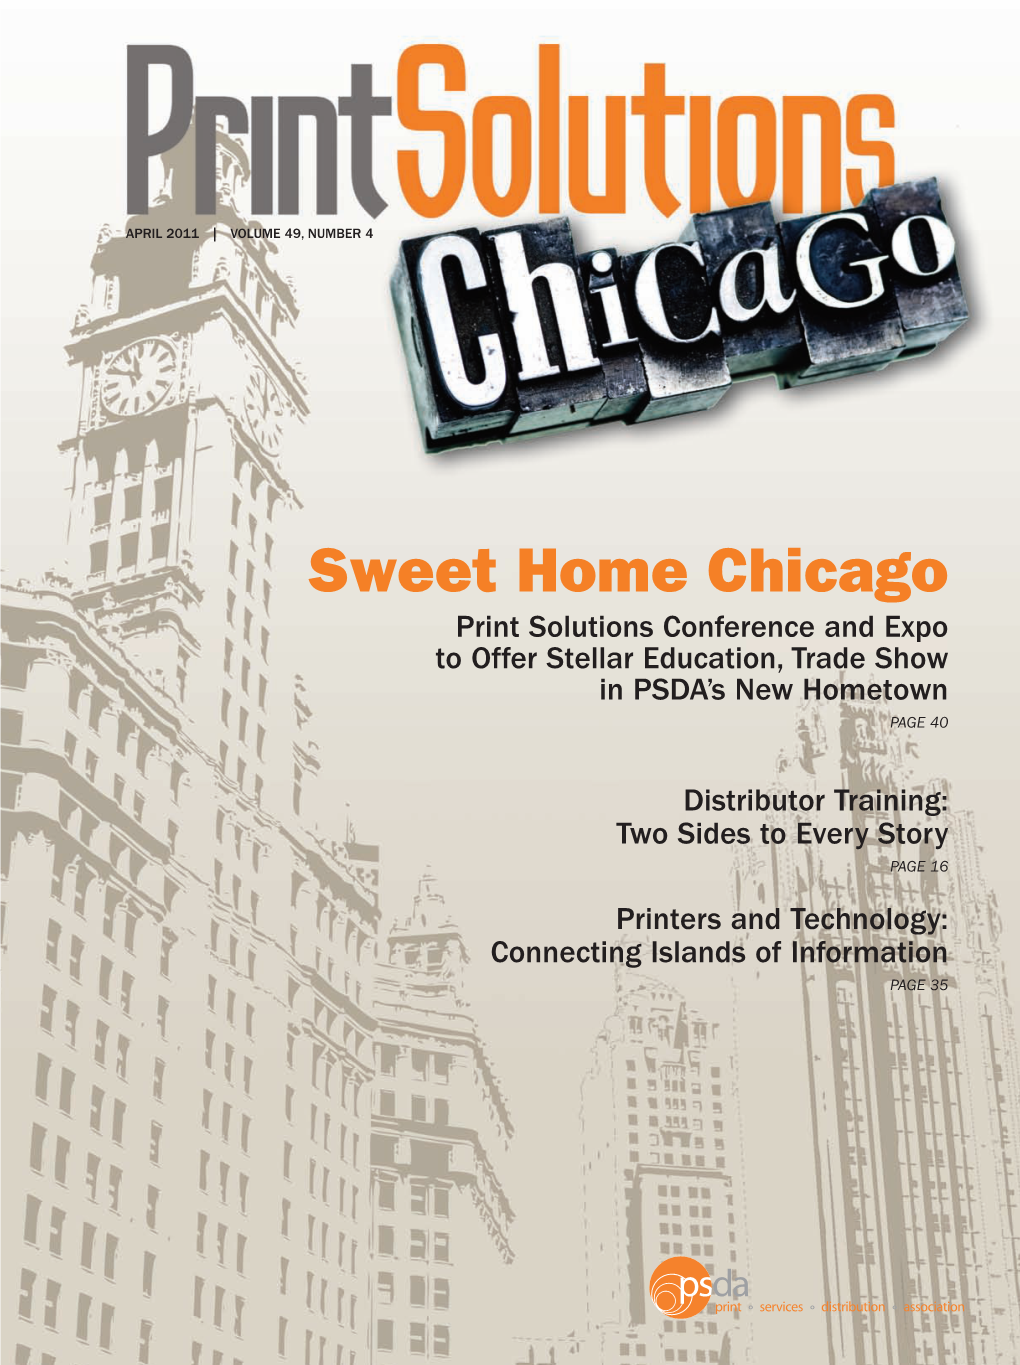 Sweet Home Chicago Print Solutions Conference and Expo to Offer Stellar Education, Trade Show in PSDA’S New Hometown PAGE 40